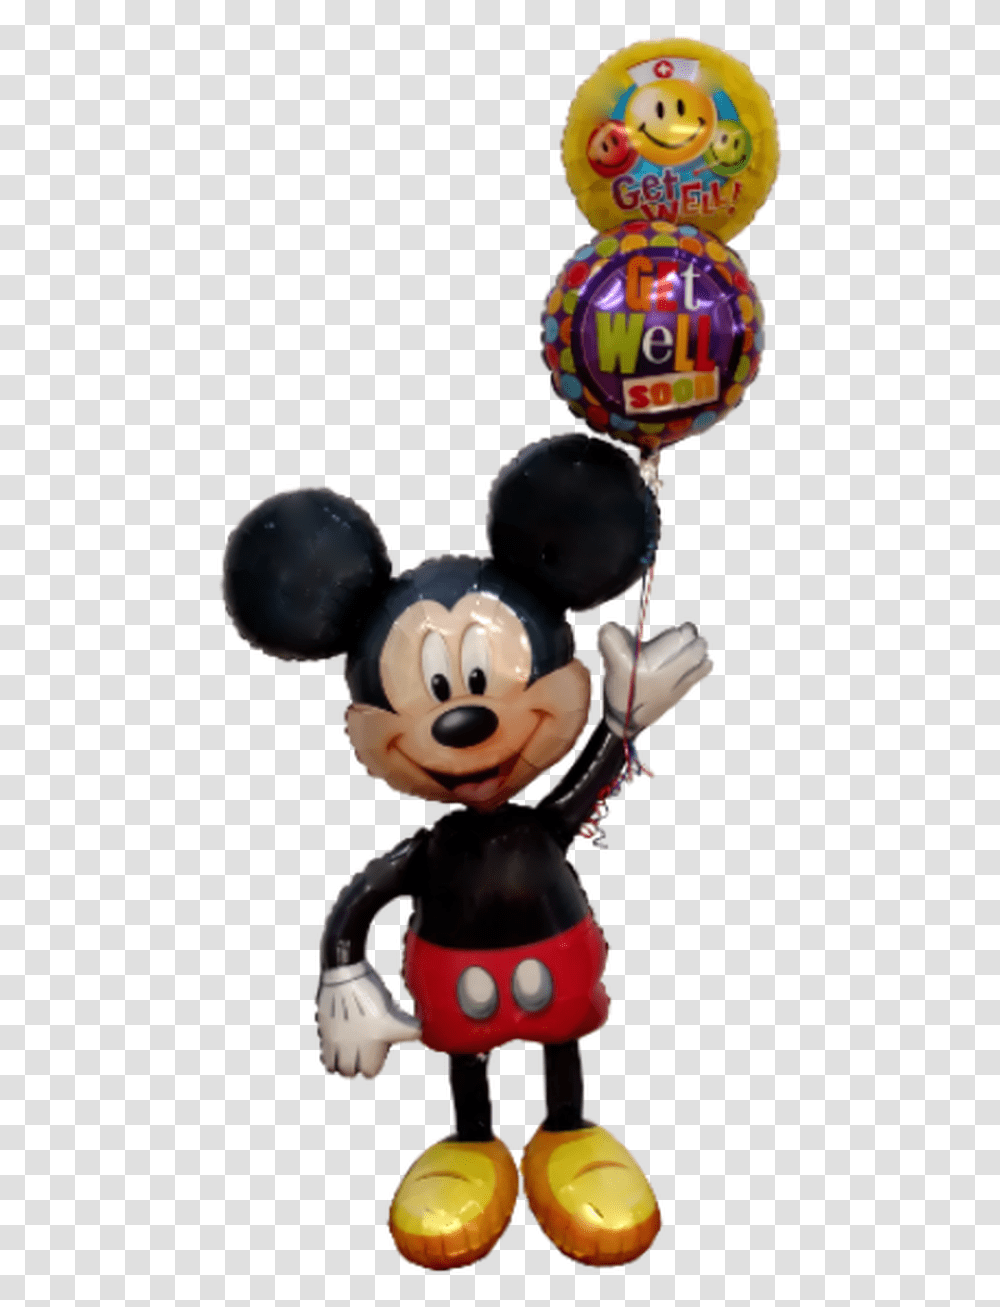 Mickey Mouse Airwalker Mickey Mouse Bithday, Toy, Sweets, Food, Confectionery Transparent Png